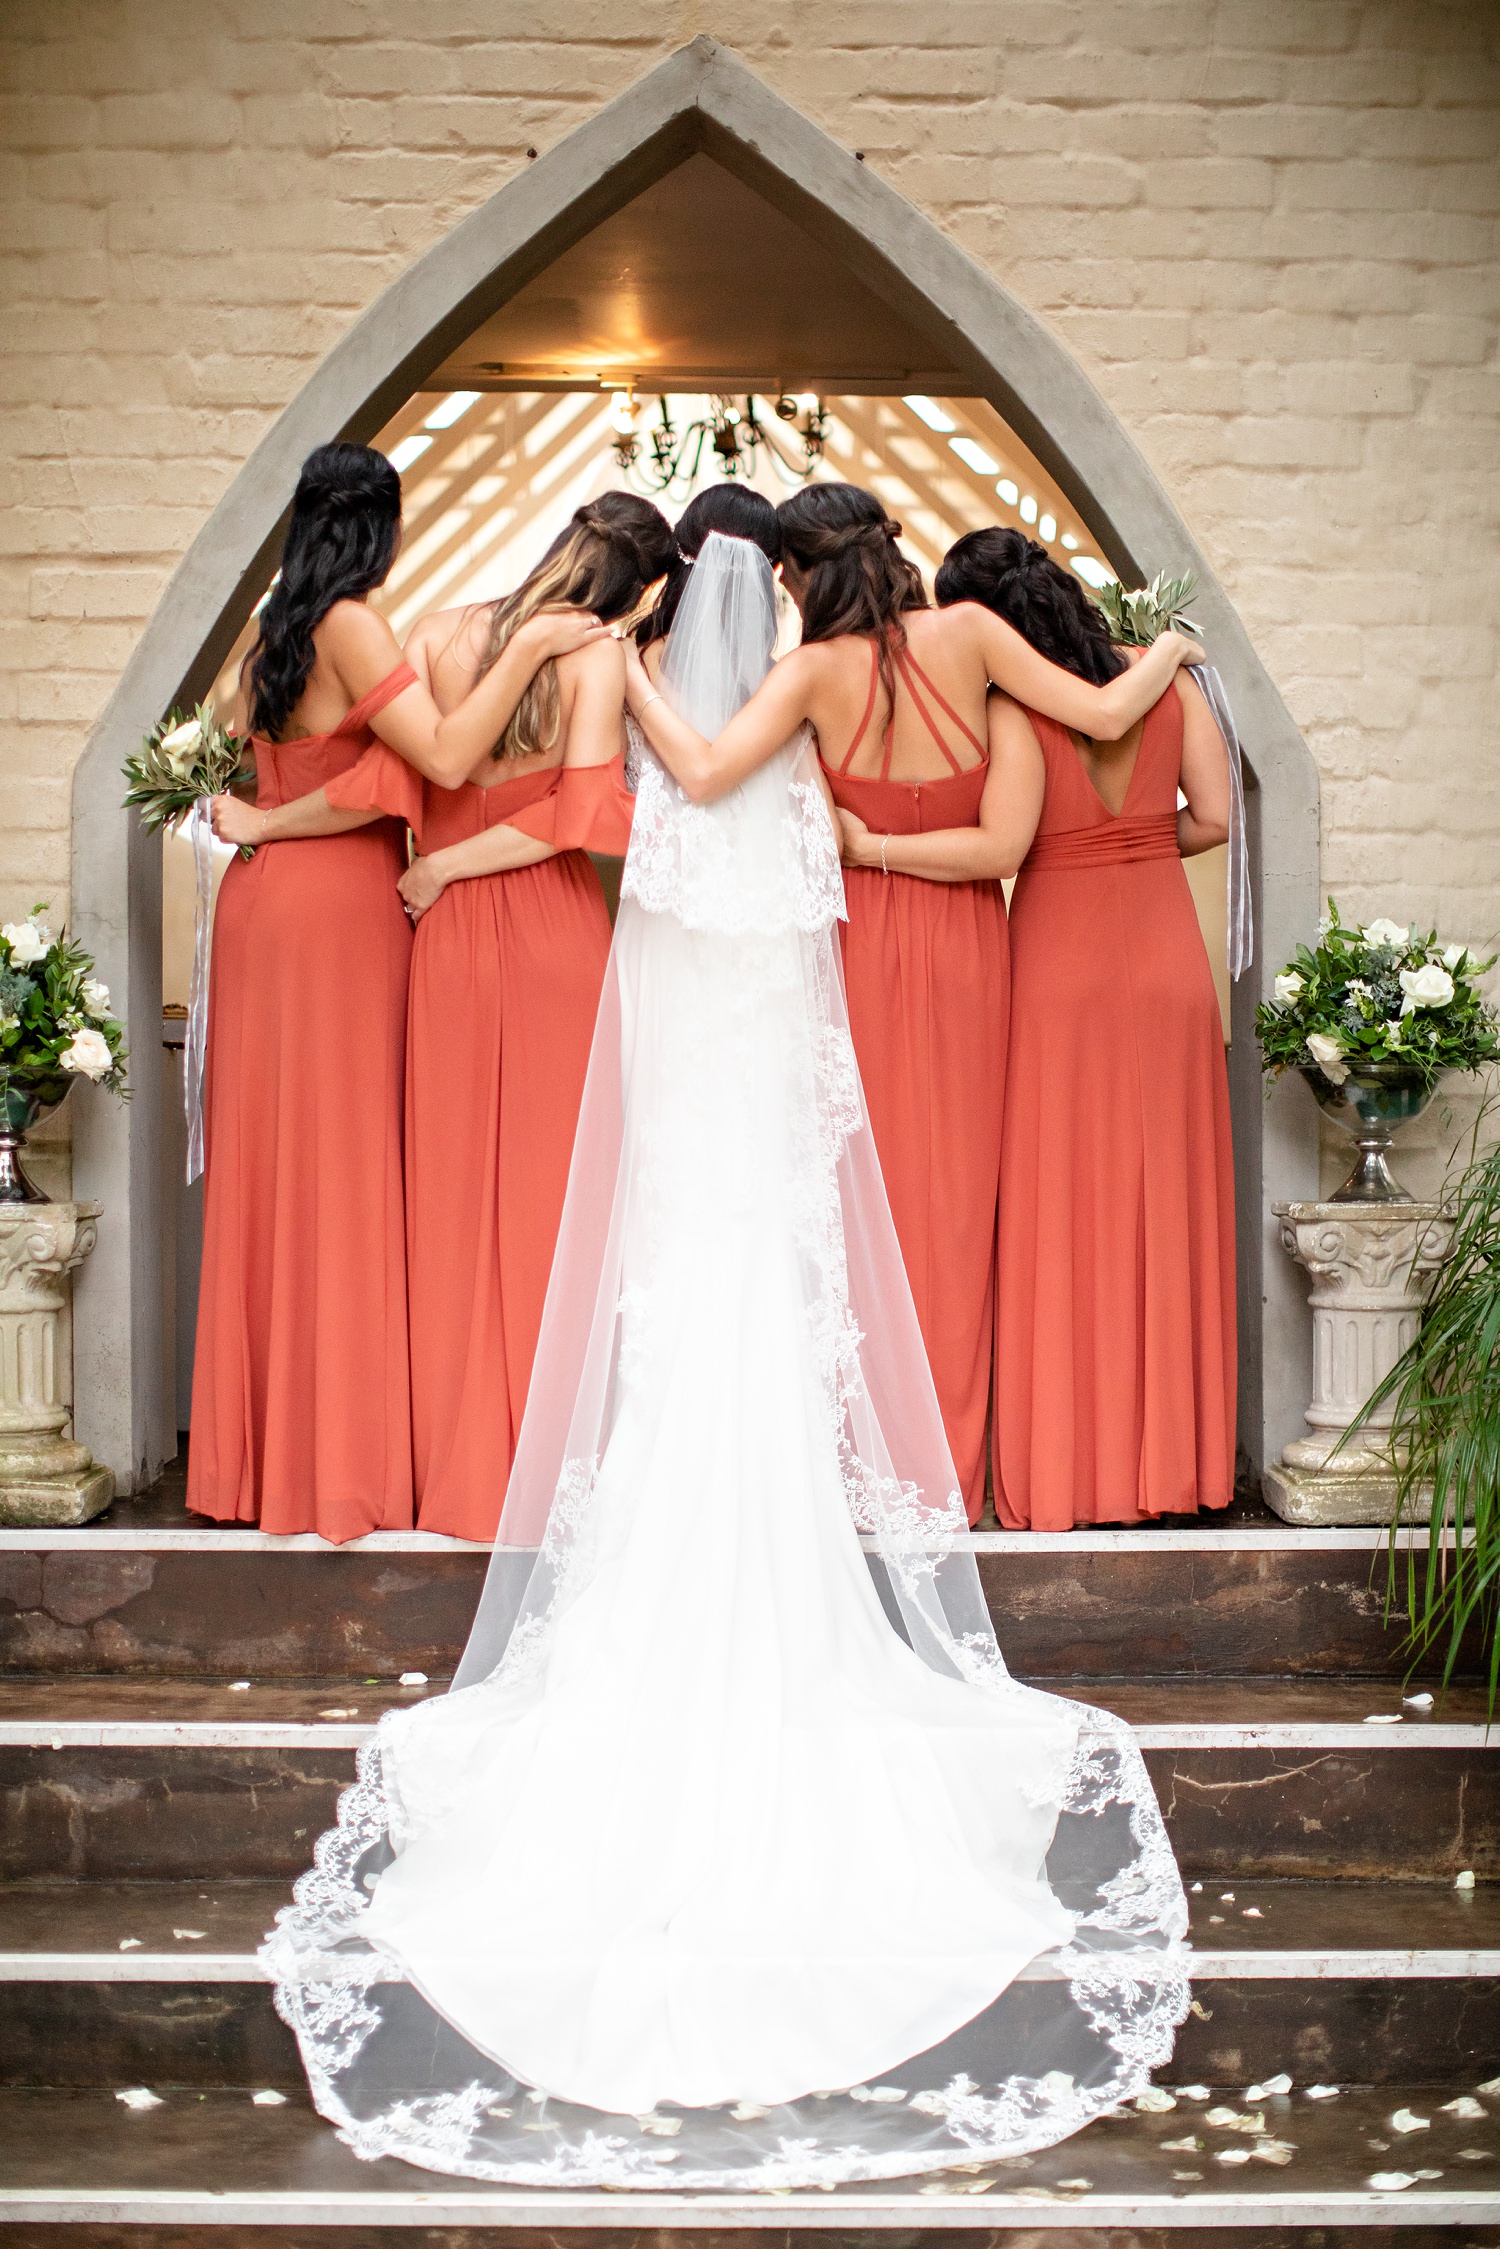 Styled bridesmaid photo from behind the group as they embrace the bride